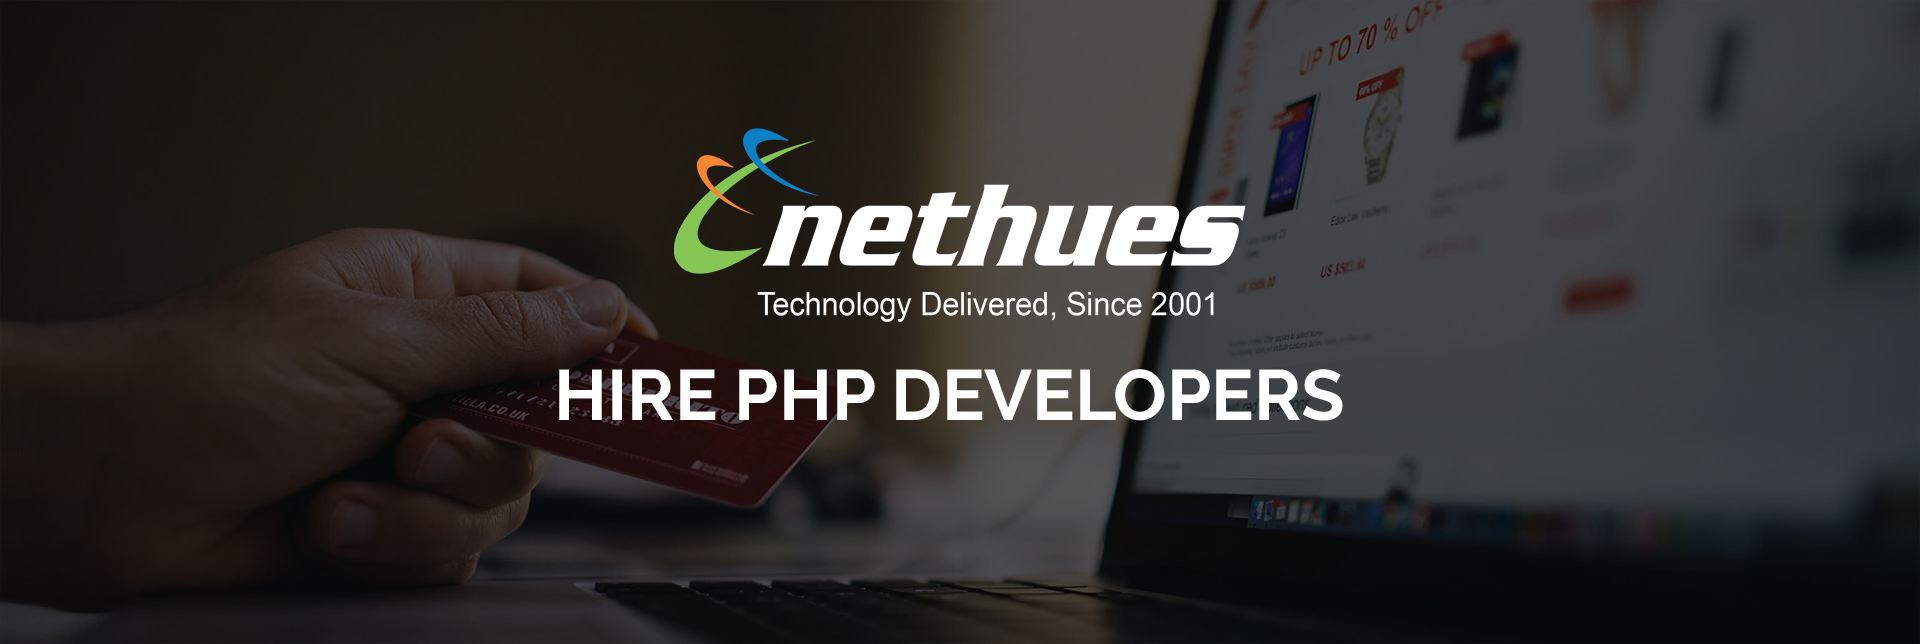 Hire Dedicated PHP Developers & Programmers India | Nethues